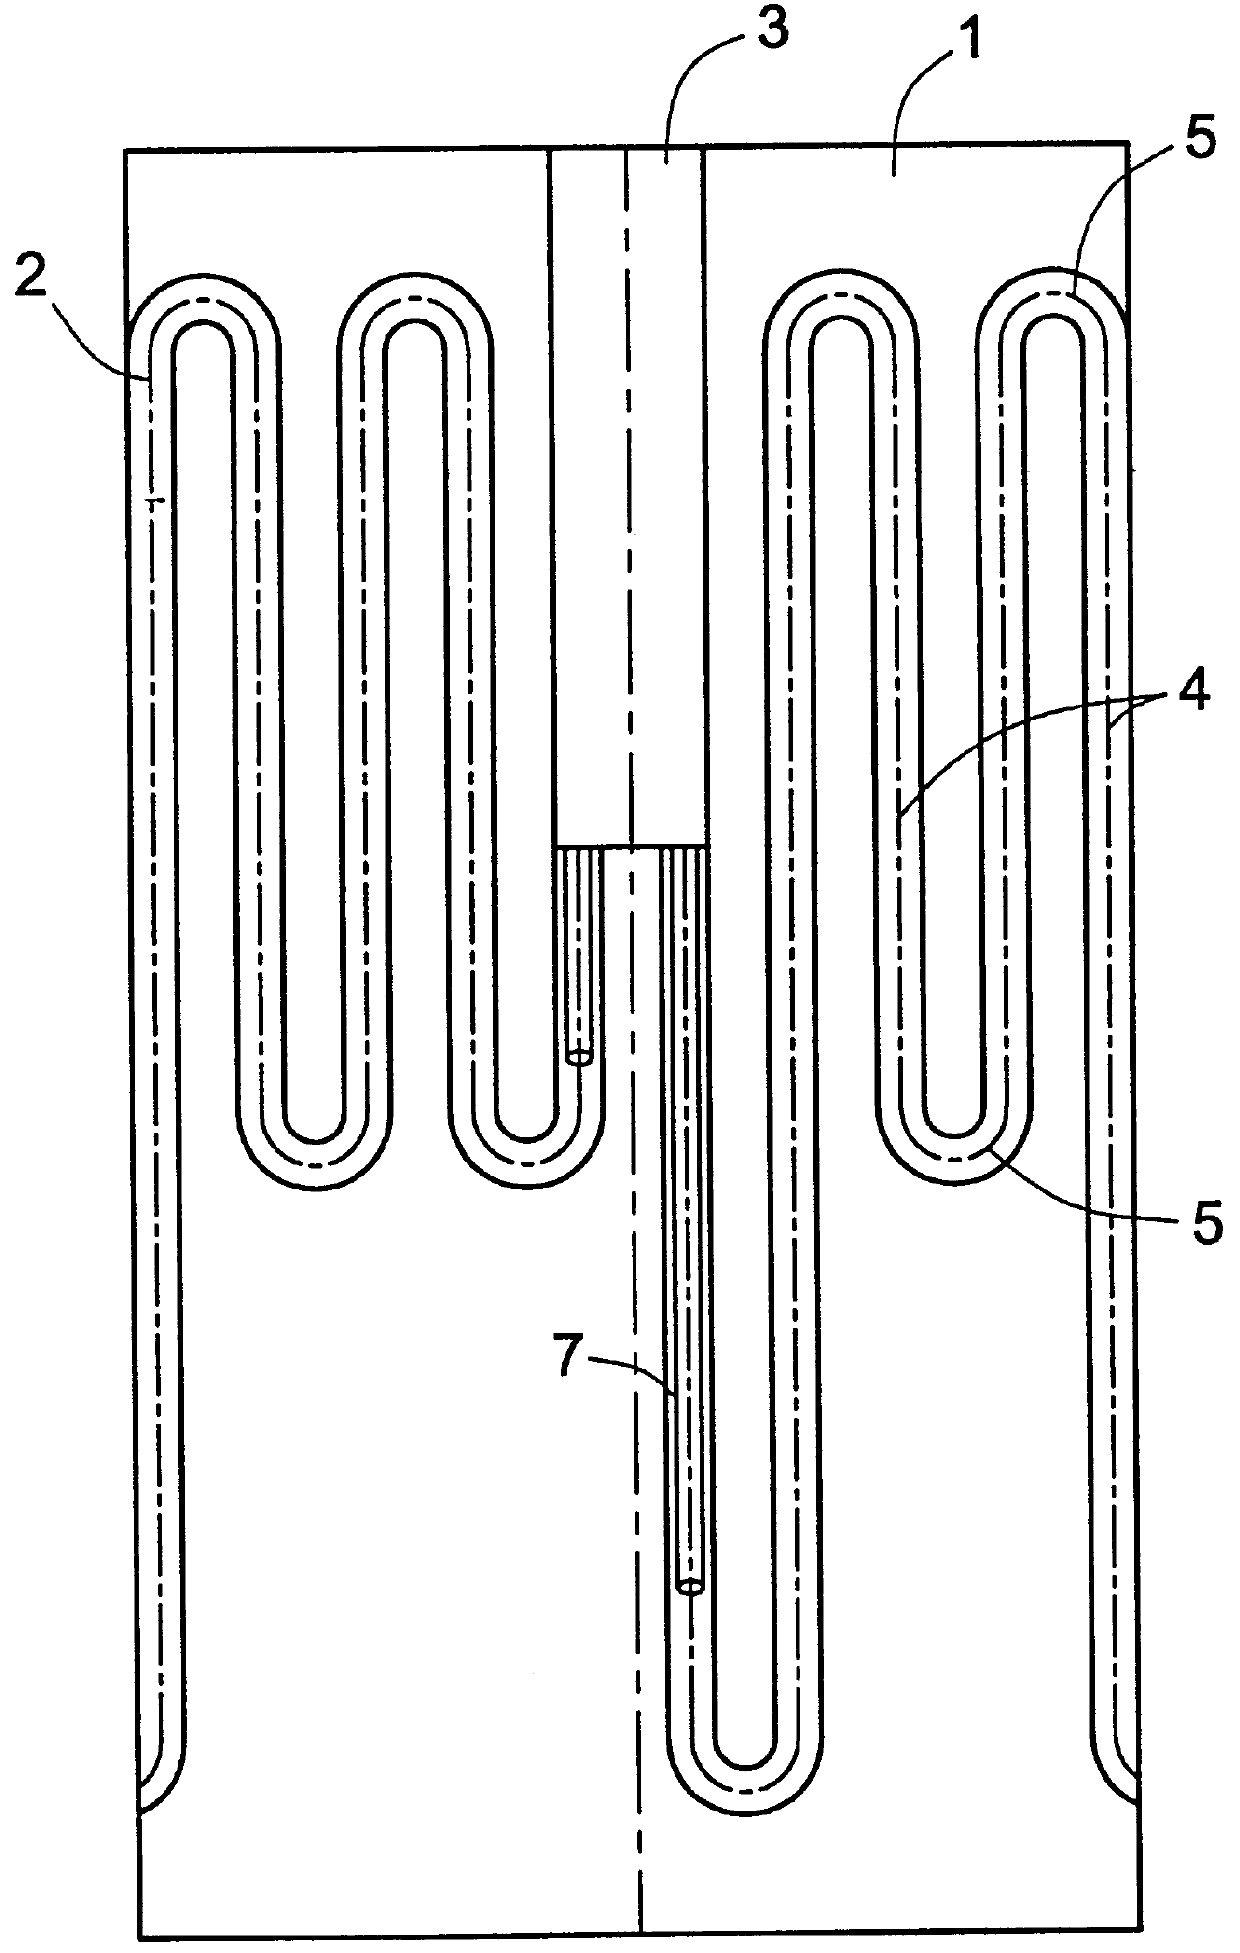 Cartridge heater for a gas chromatography transfer device